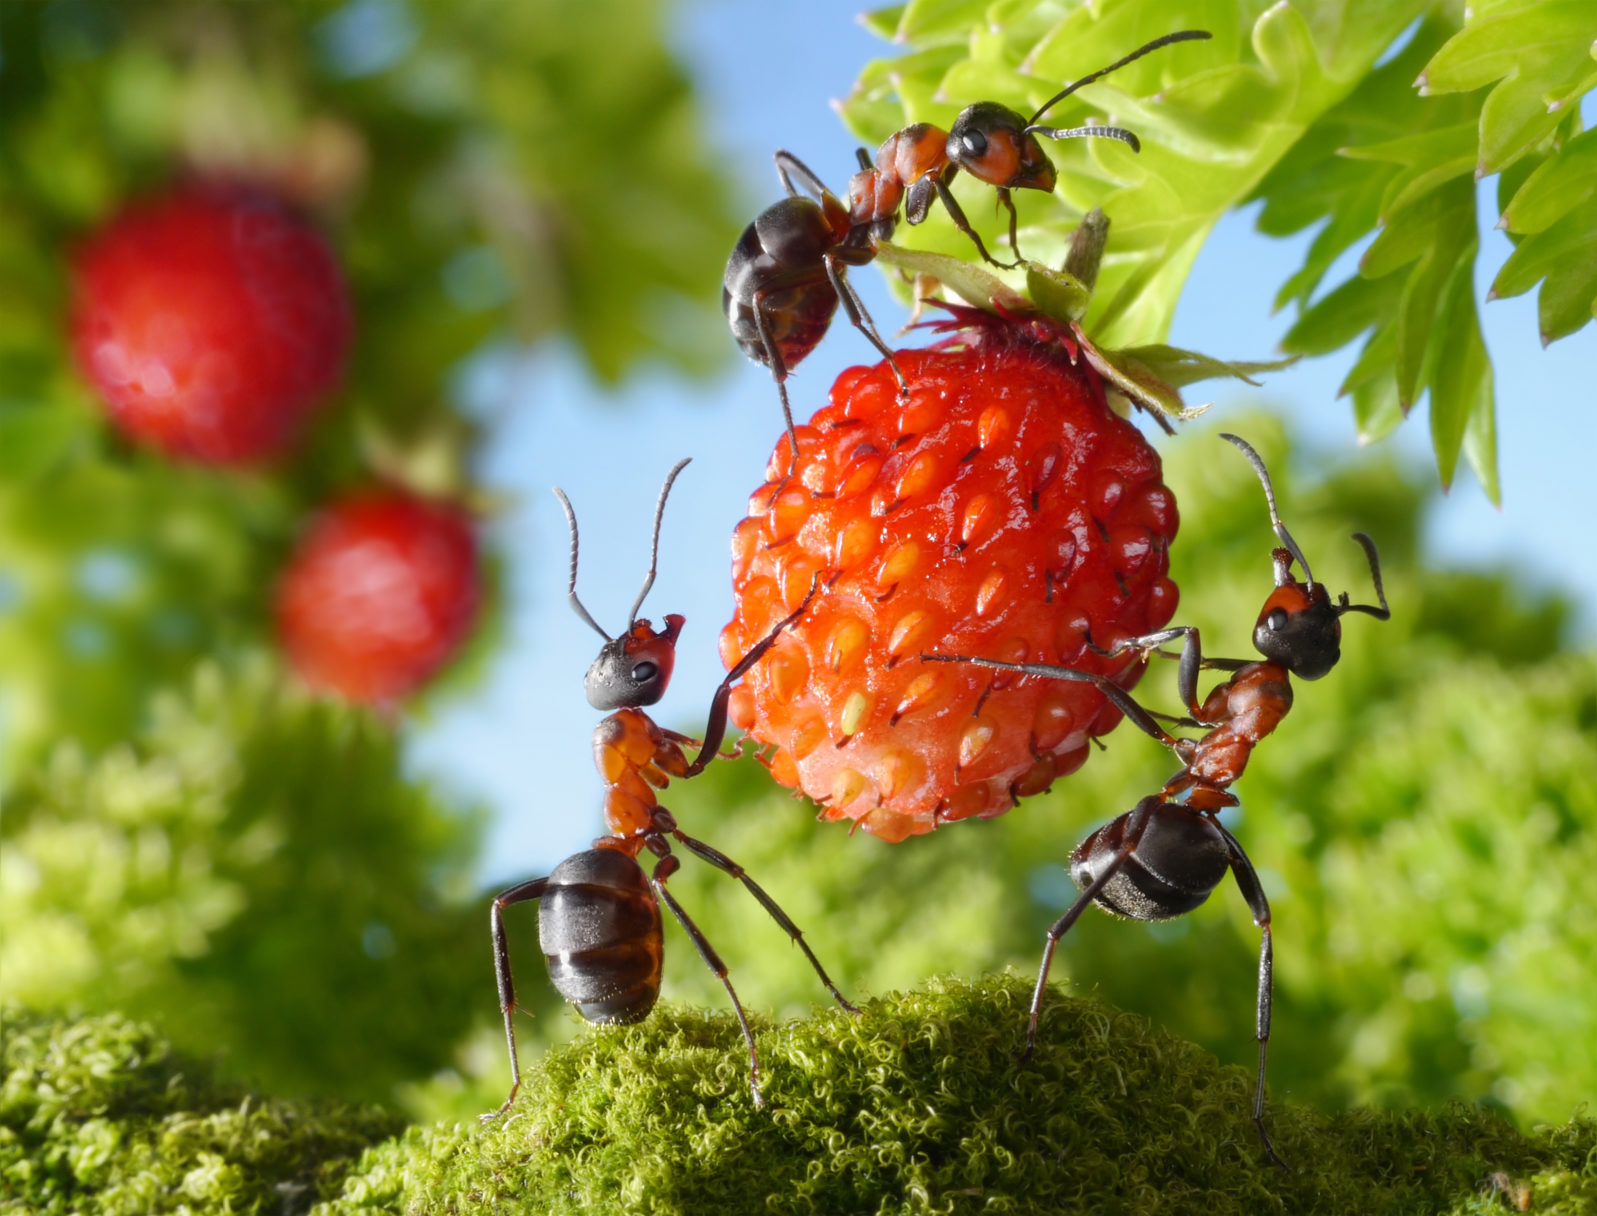 team of ants gathering strawberry, agriculture teamwork